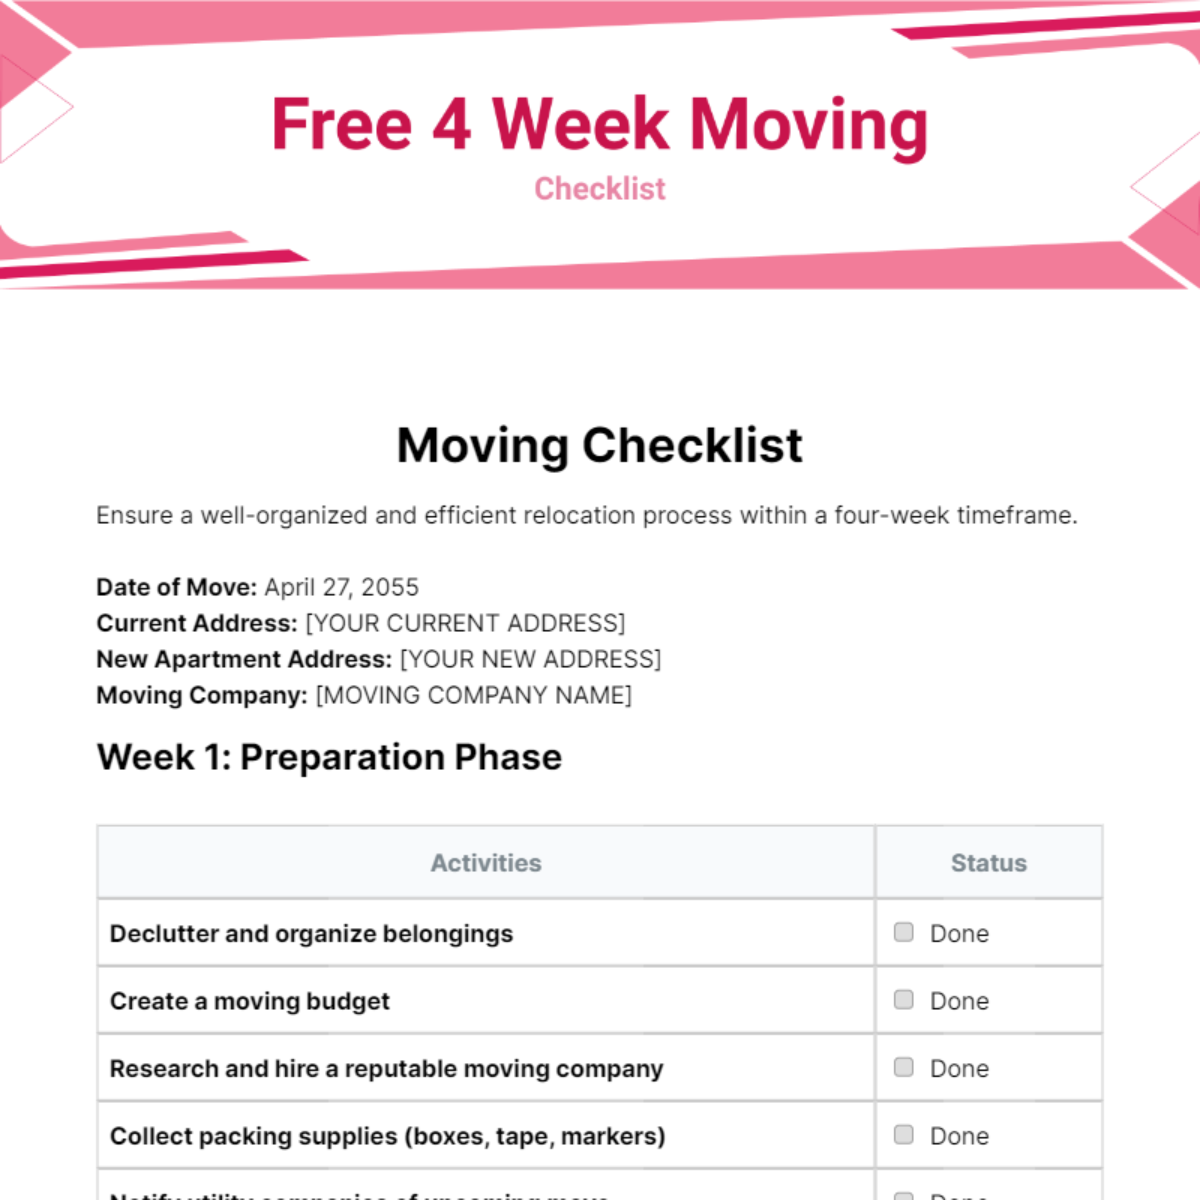 Free 4 Week Moving Checklist Template